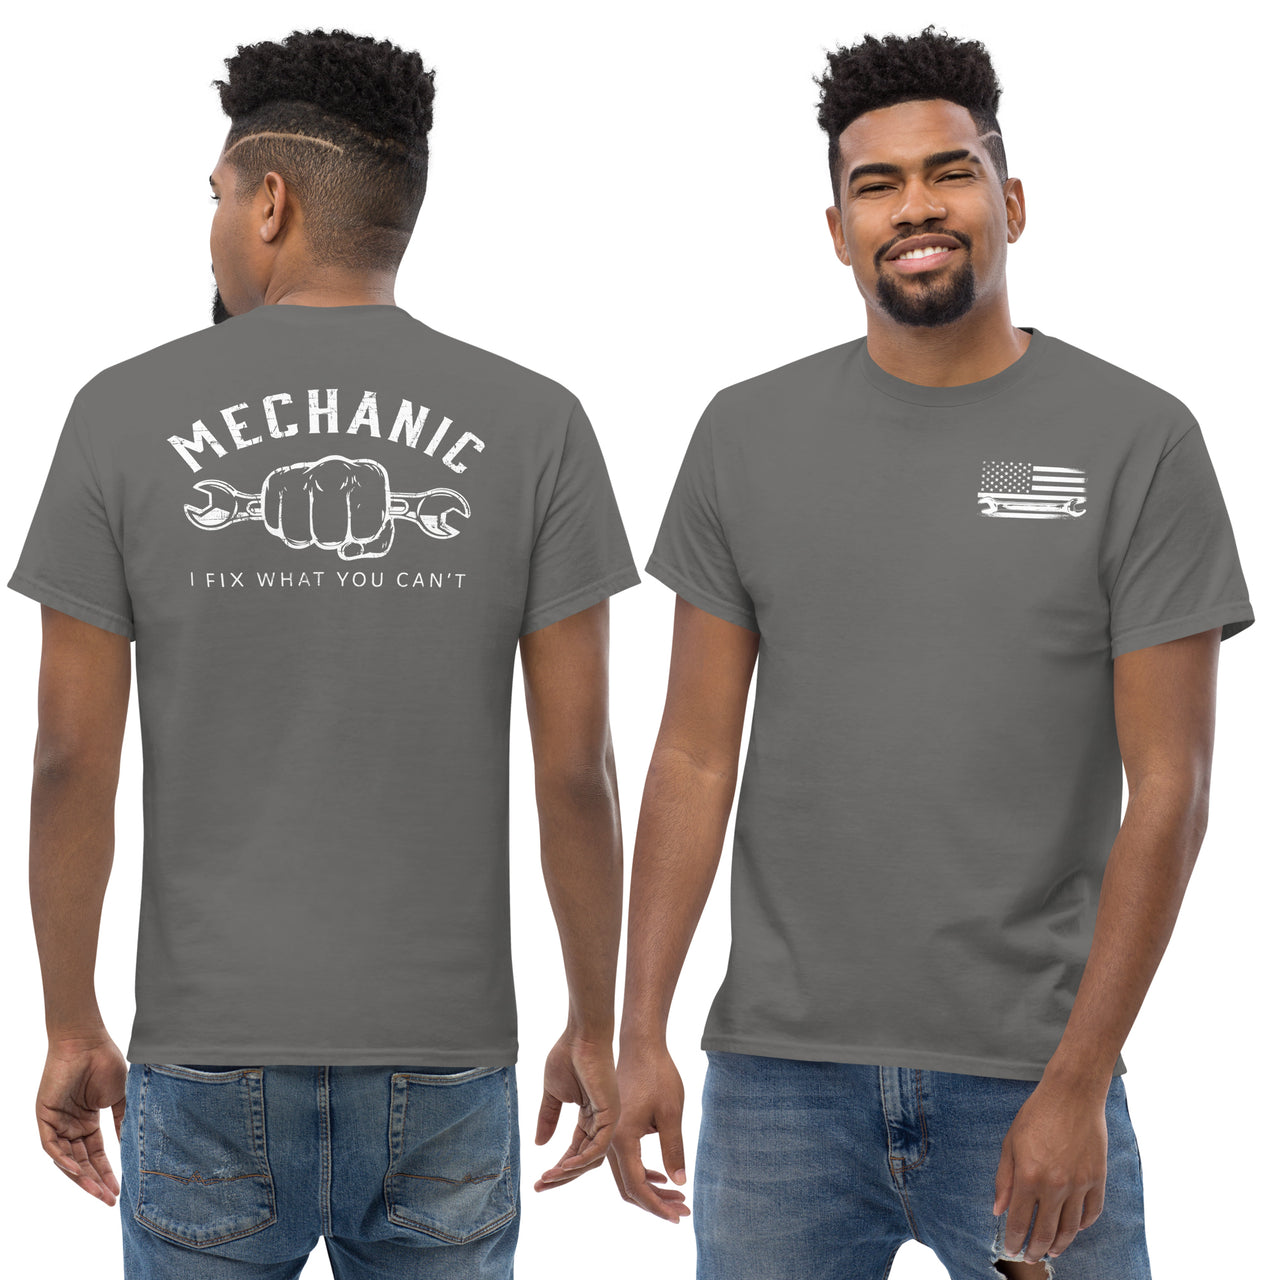 Mechanic T-Shirt - I Fix What You Cant modeled in grey